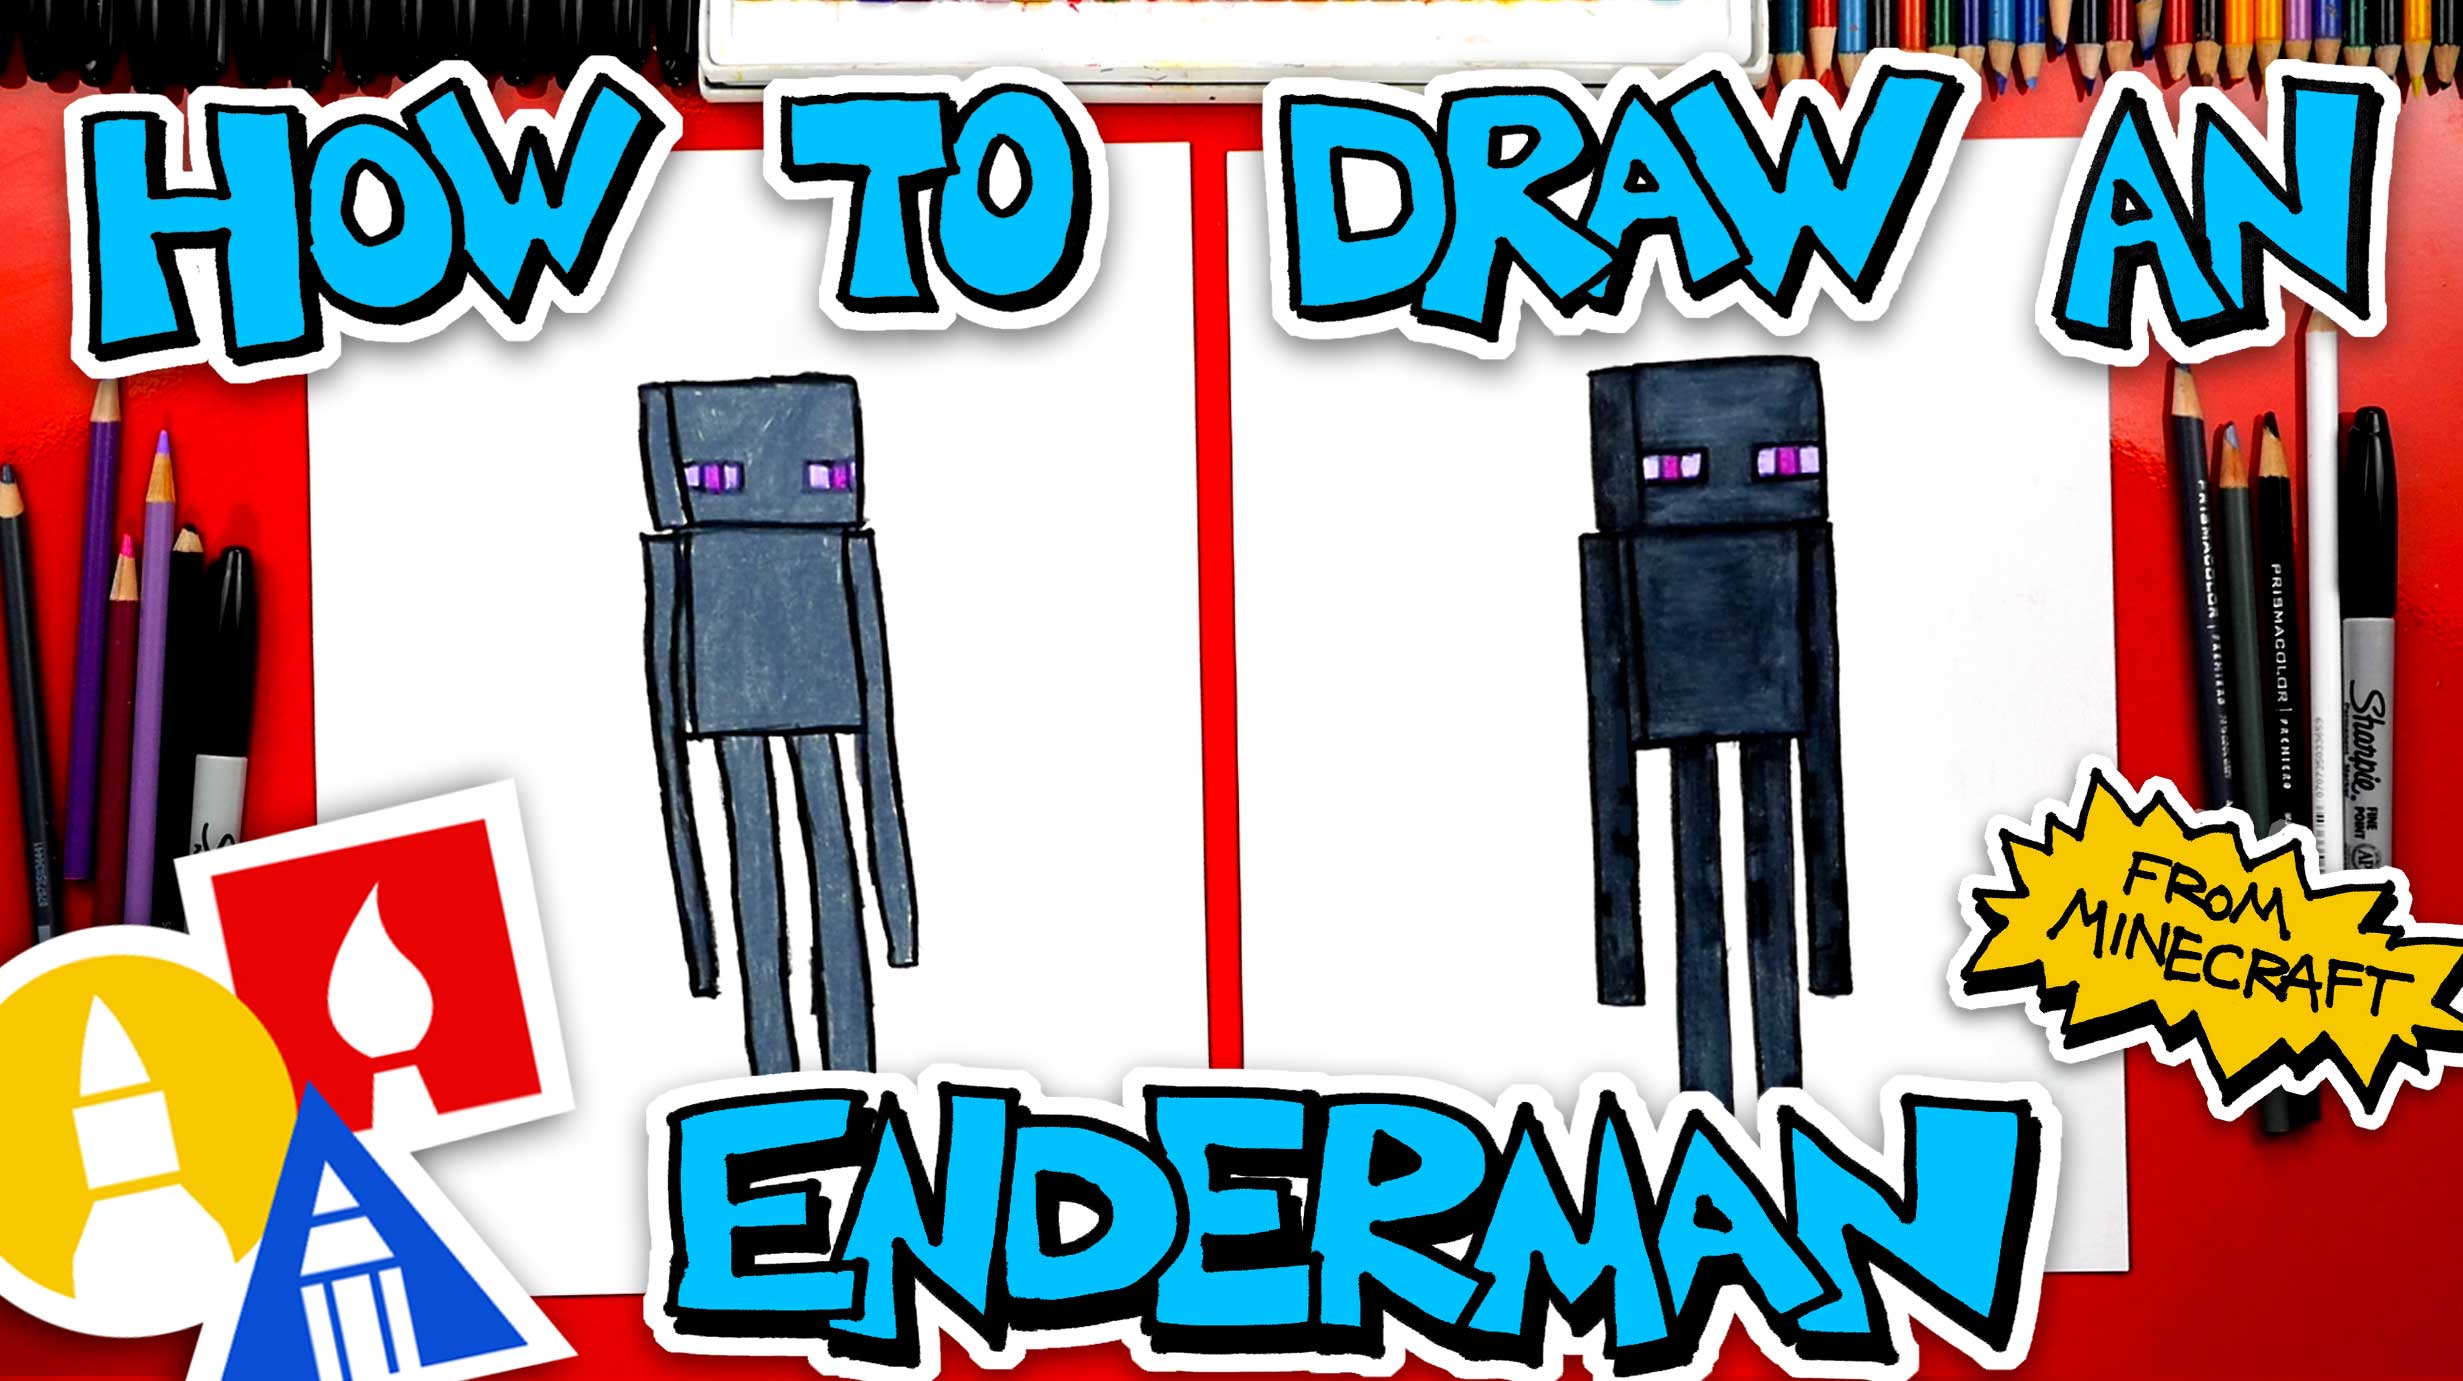 How To Draw An Enderman From Minecraft Art For Kids Hub